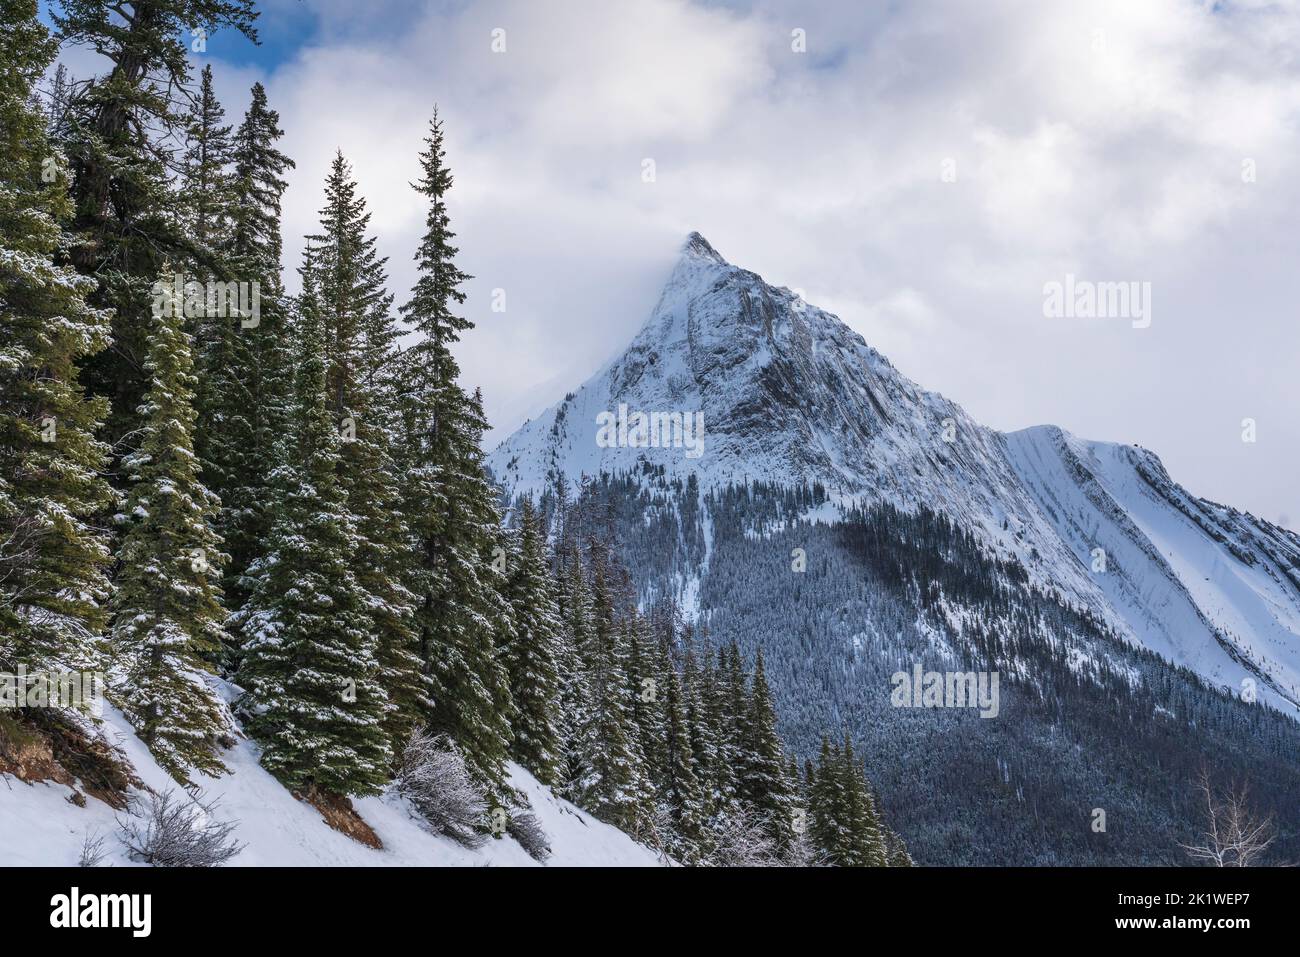 A mountain and forest scenic along the Maligne Lake road in winter, Jasper National Park, Alberta, Canada. Stock Photo